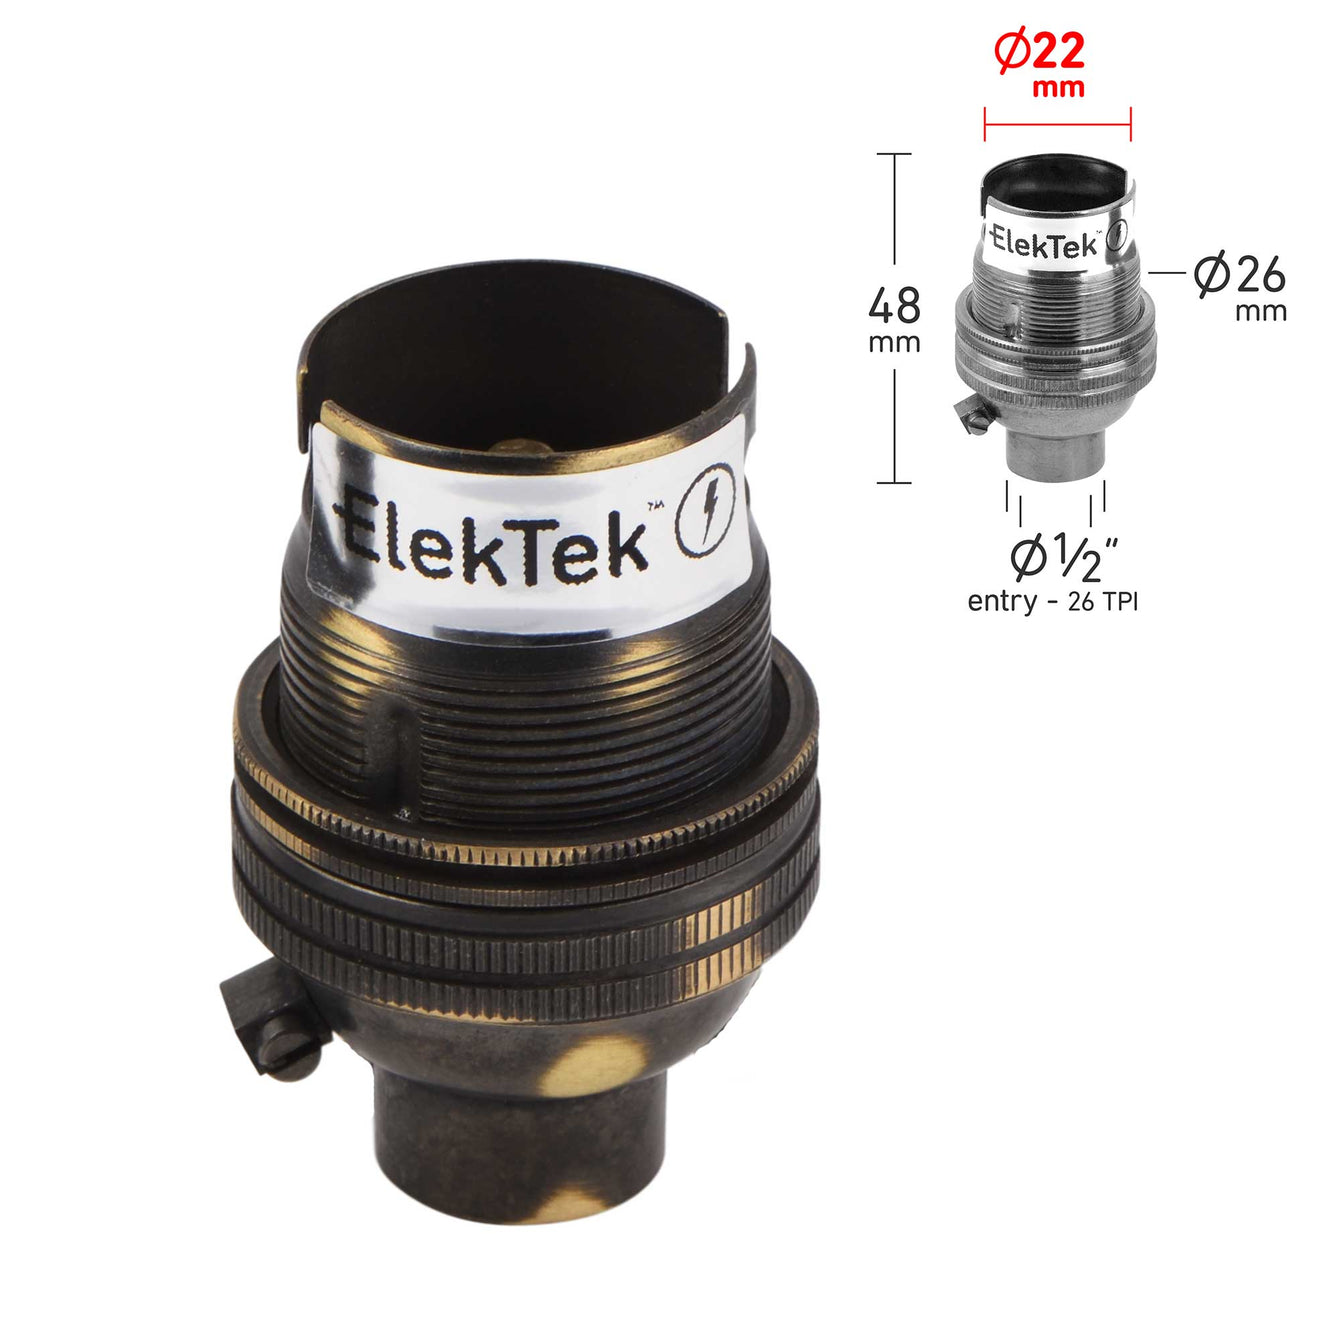 ElekTek Lamp Holder Bayonet Cap B22 Unswitched 10mm or Half Inch Entry With Shade Ring Solid Brass - Buy It Better 